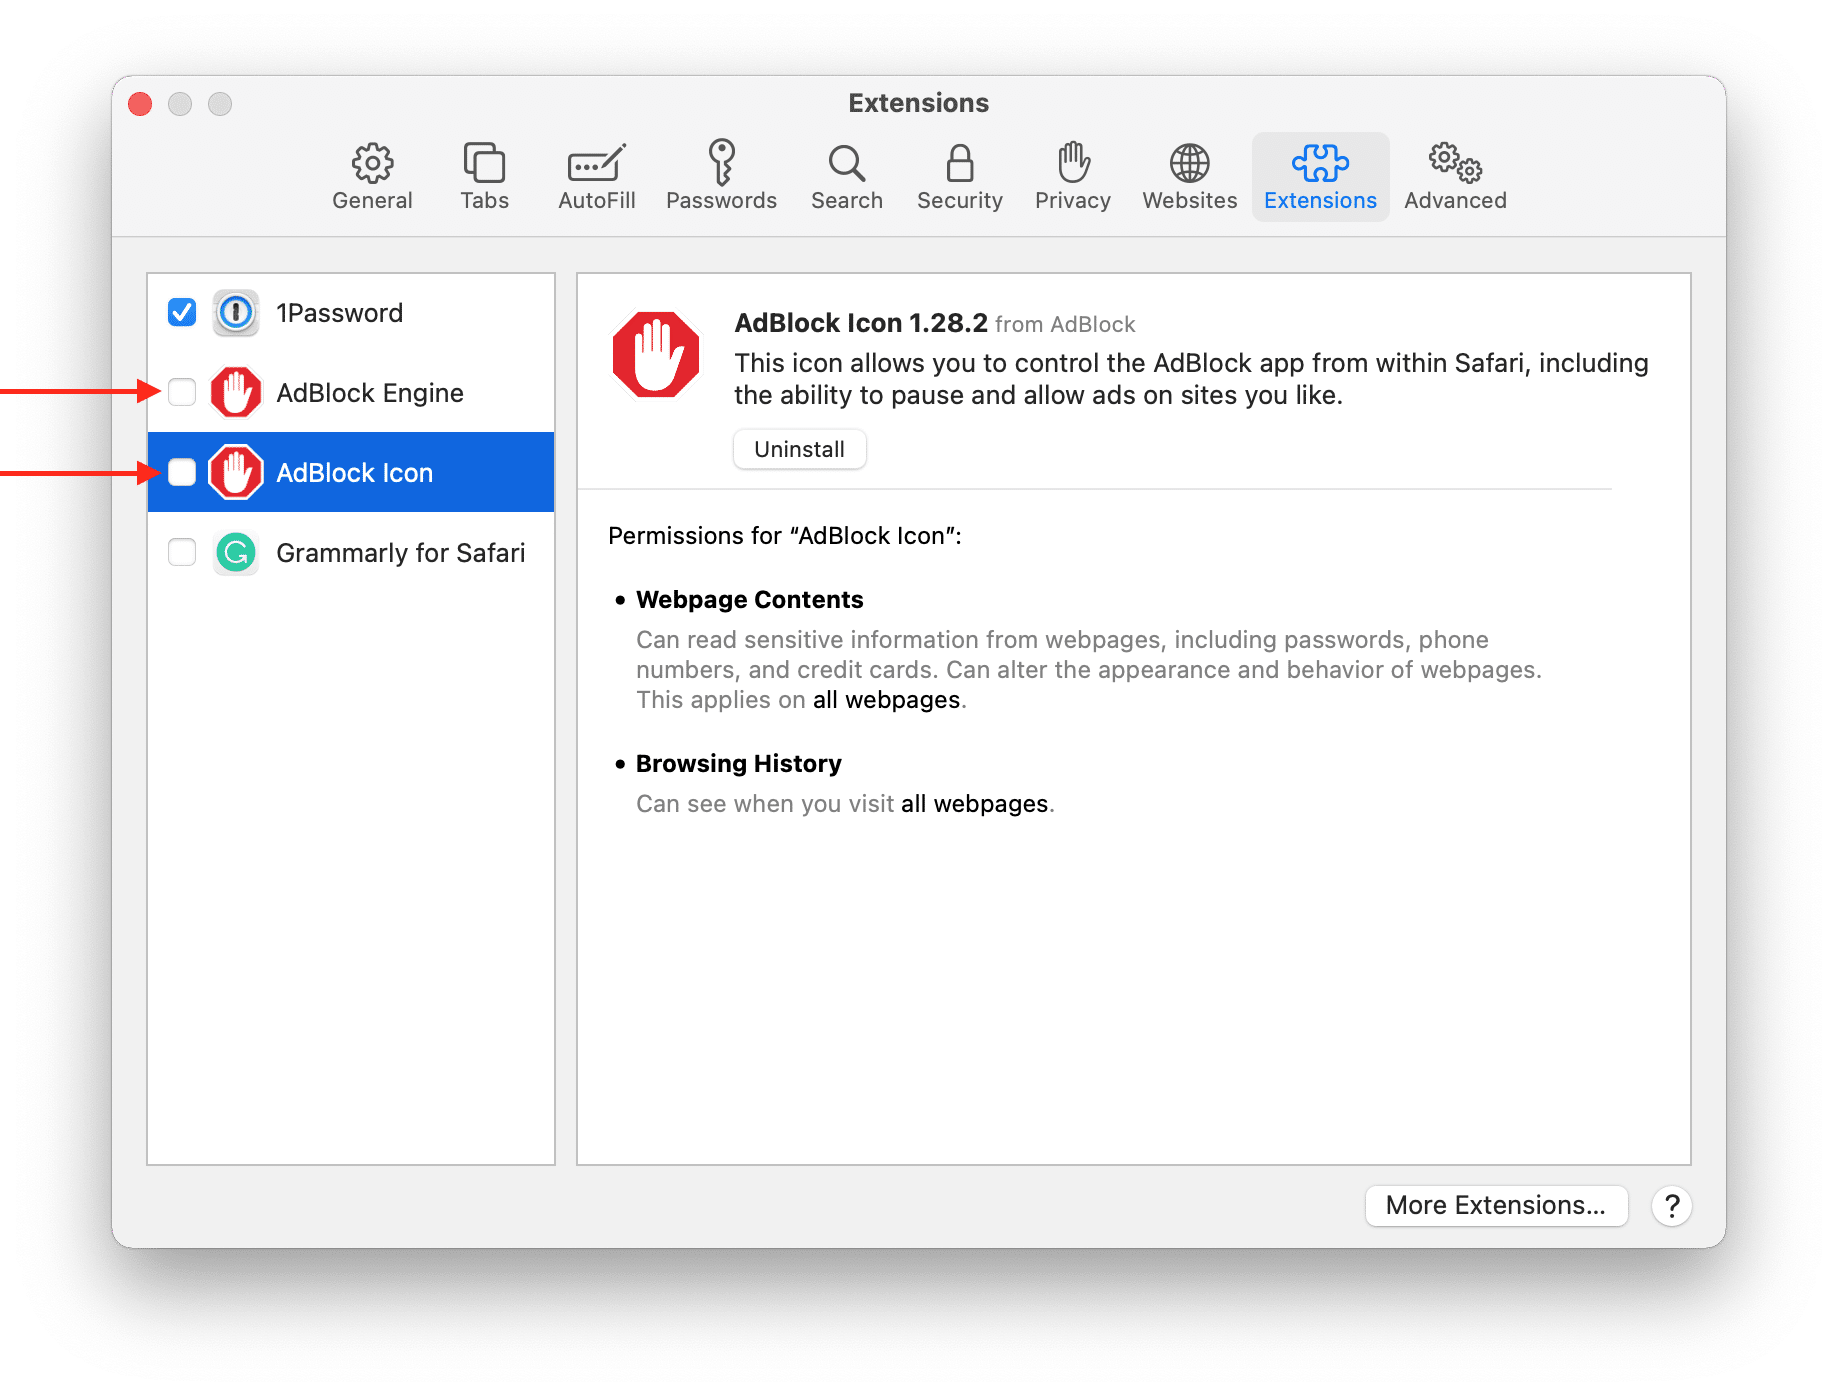 Safari Preferences showing the Extensions tab and AdBlock items